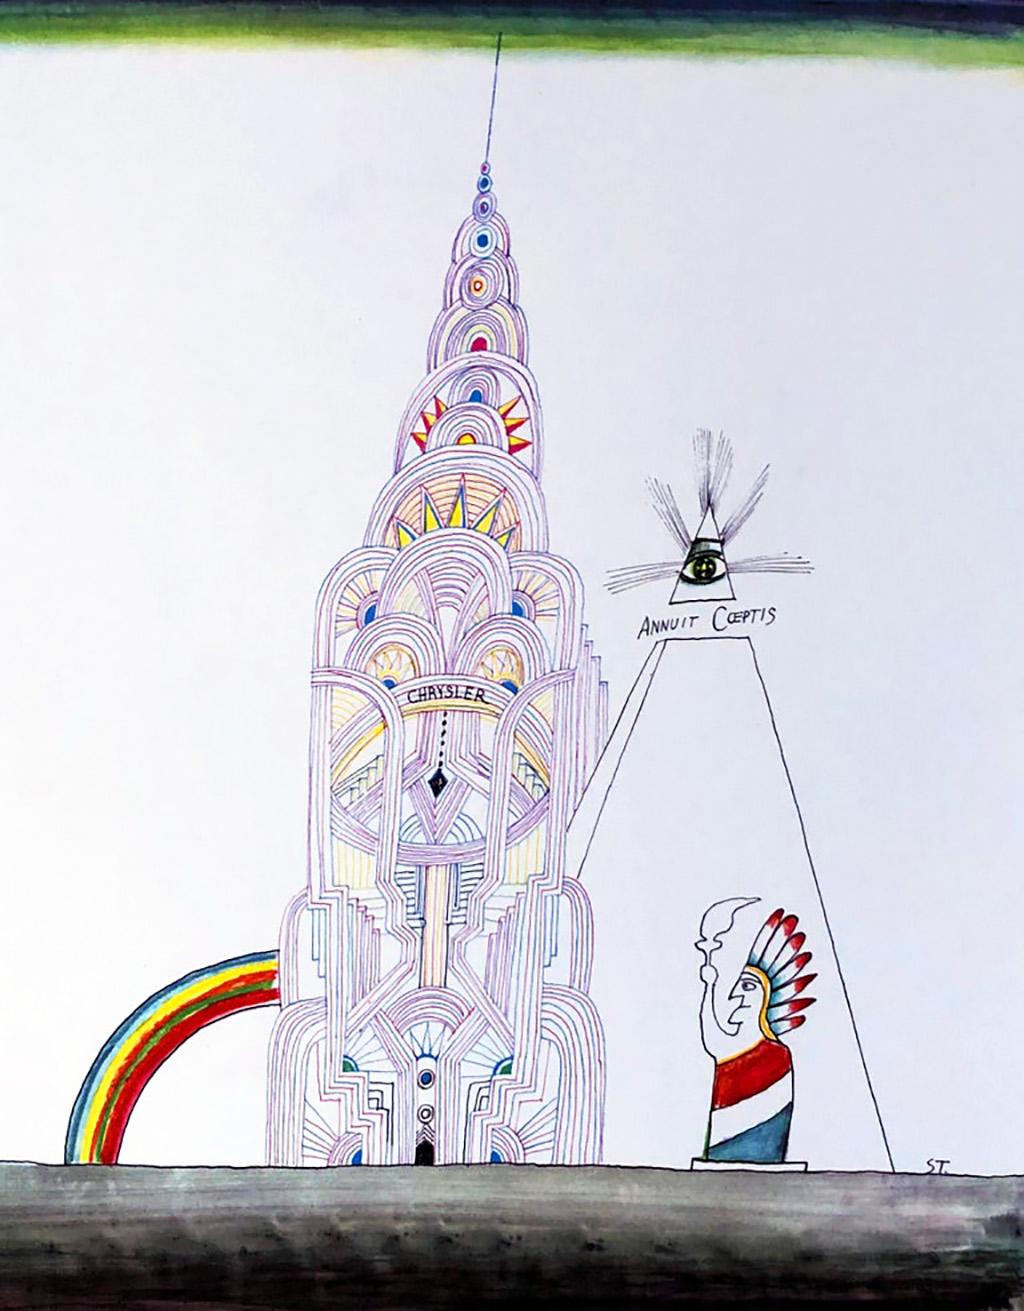 Saul Steinberg, New York Empire State Building Lithograph 
Published by: Galerie Maeght, Paris, c.1970
Portfolio: Derrière le miroir
Excellent frame piece

Lithograph in colors c.1970
11 x 14 inches
Very good plus condition 
Plate signed (lower